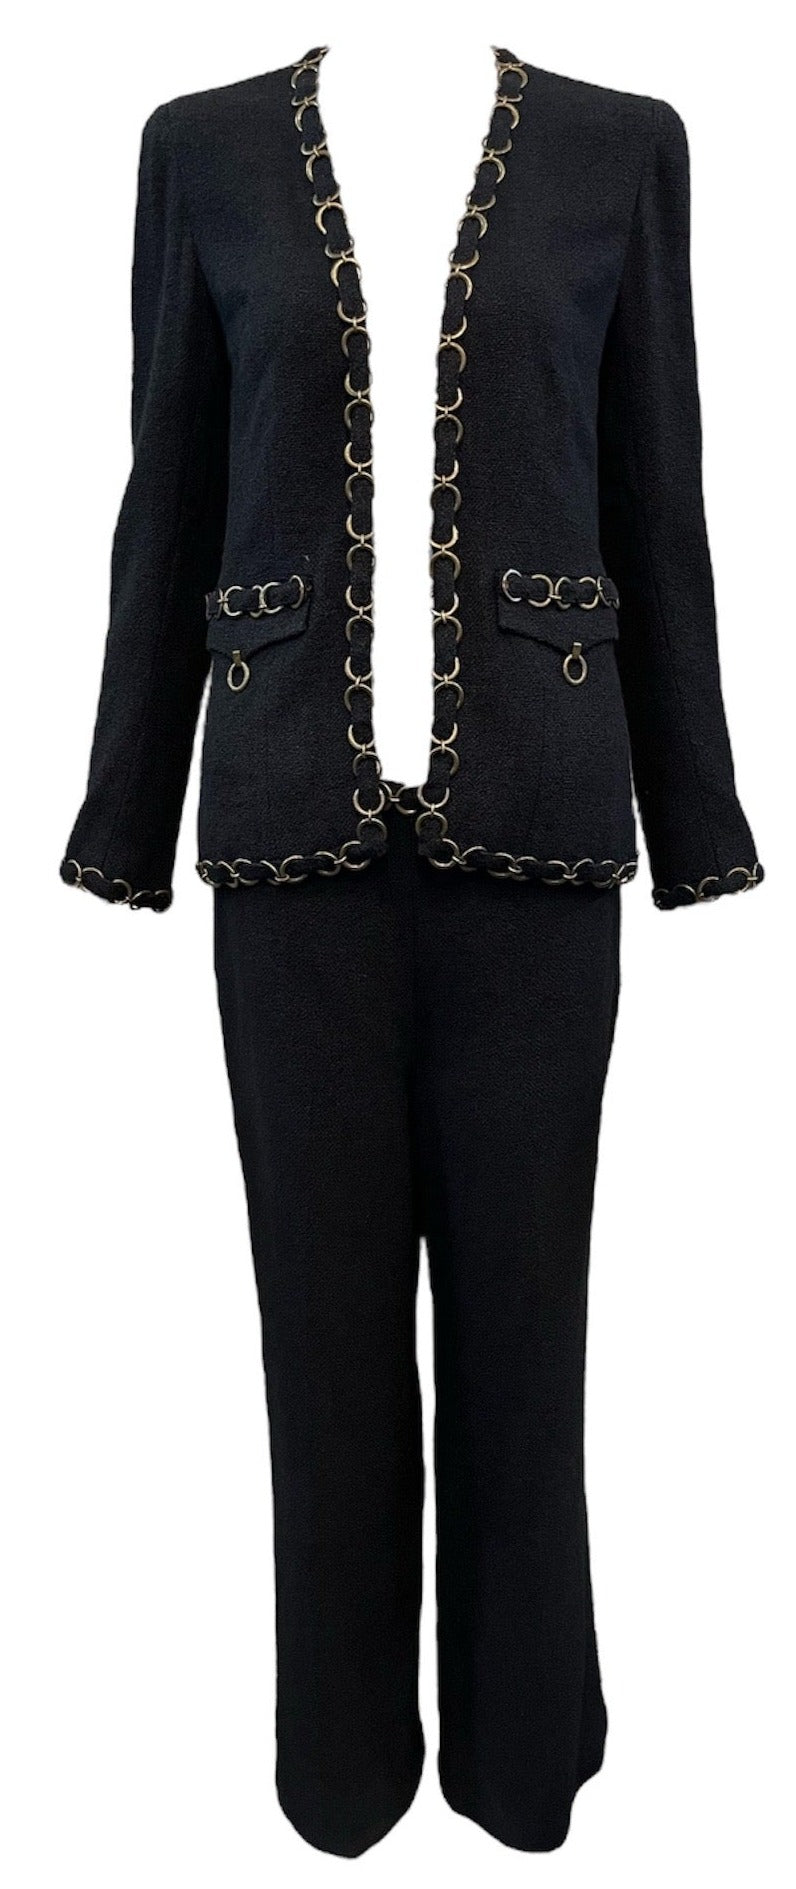 Chanel Contemporary Pant Suit with Unusual Chain Detail – THE